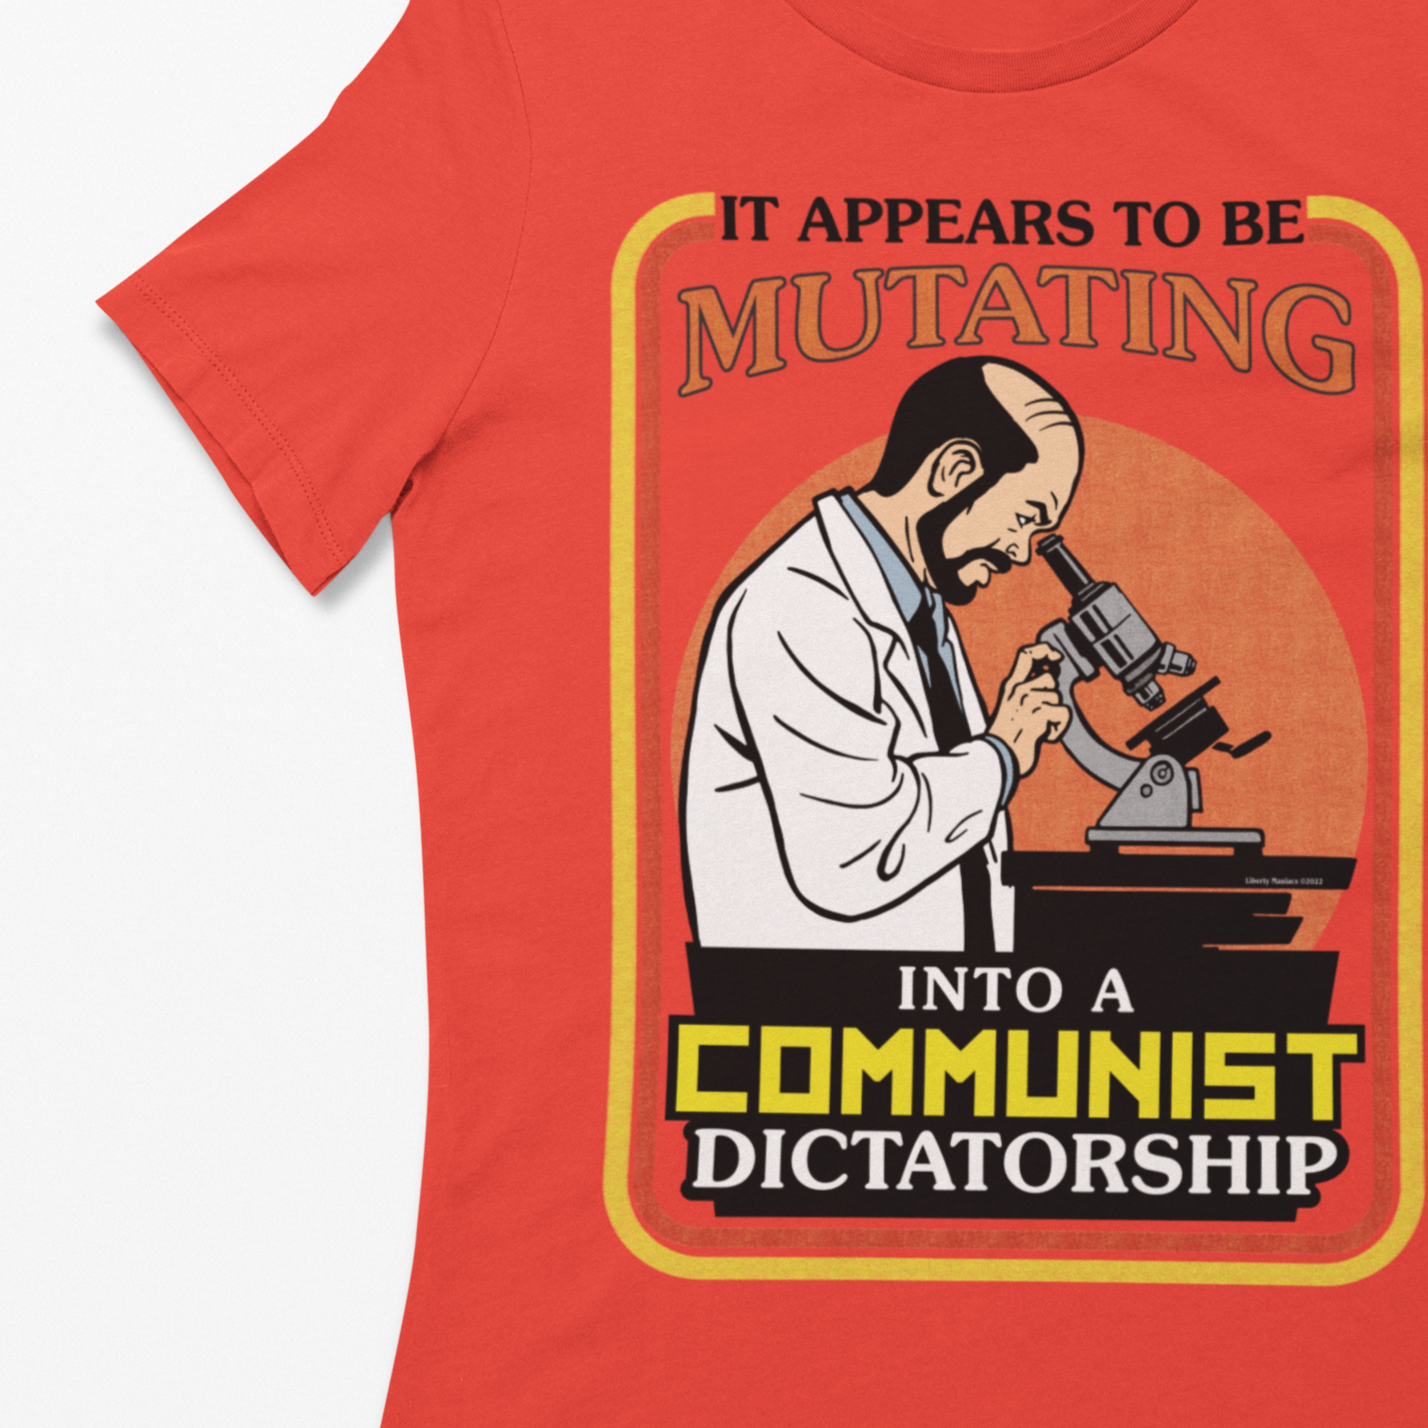 It Appears To Be Mutating Into A Communist Dictatorship Women's Relaxed T-Shirt